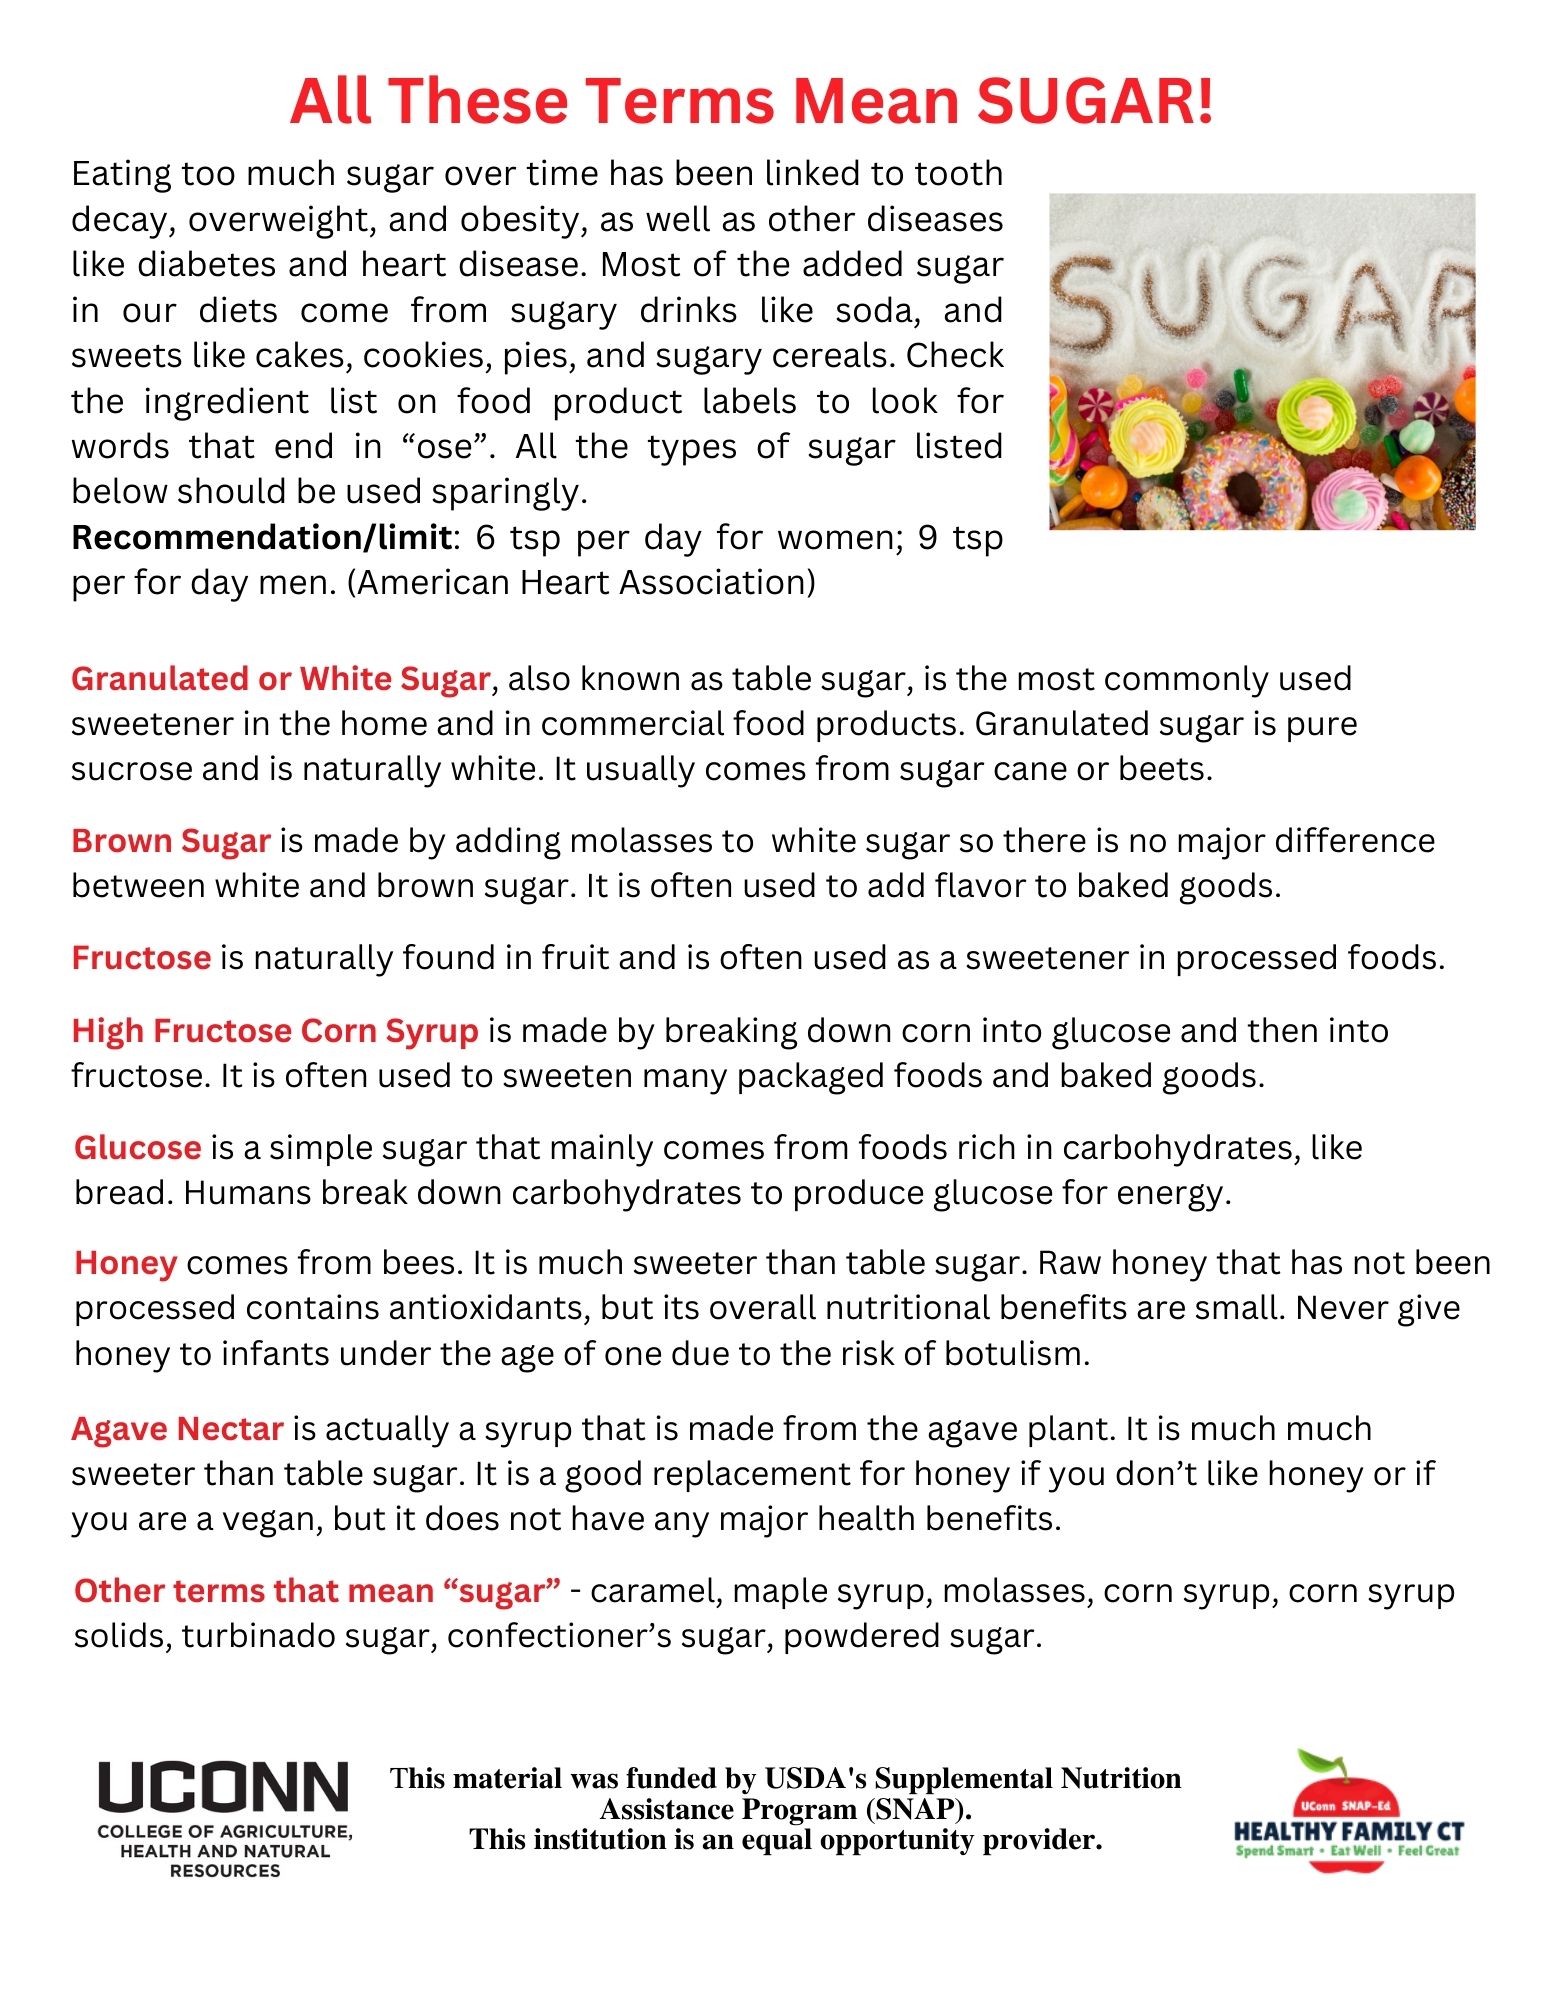 handout on terms that mean sugar on a food label